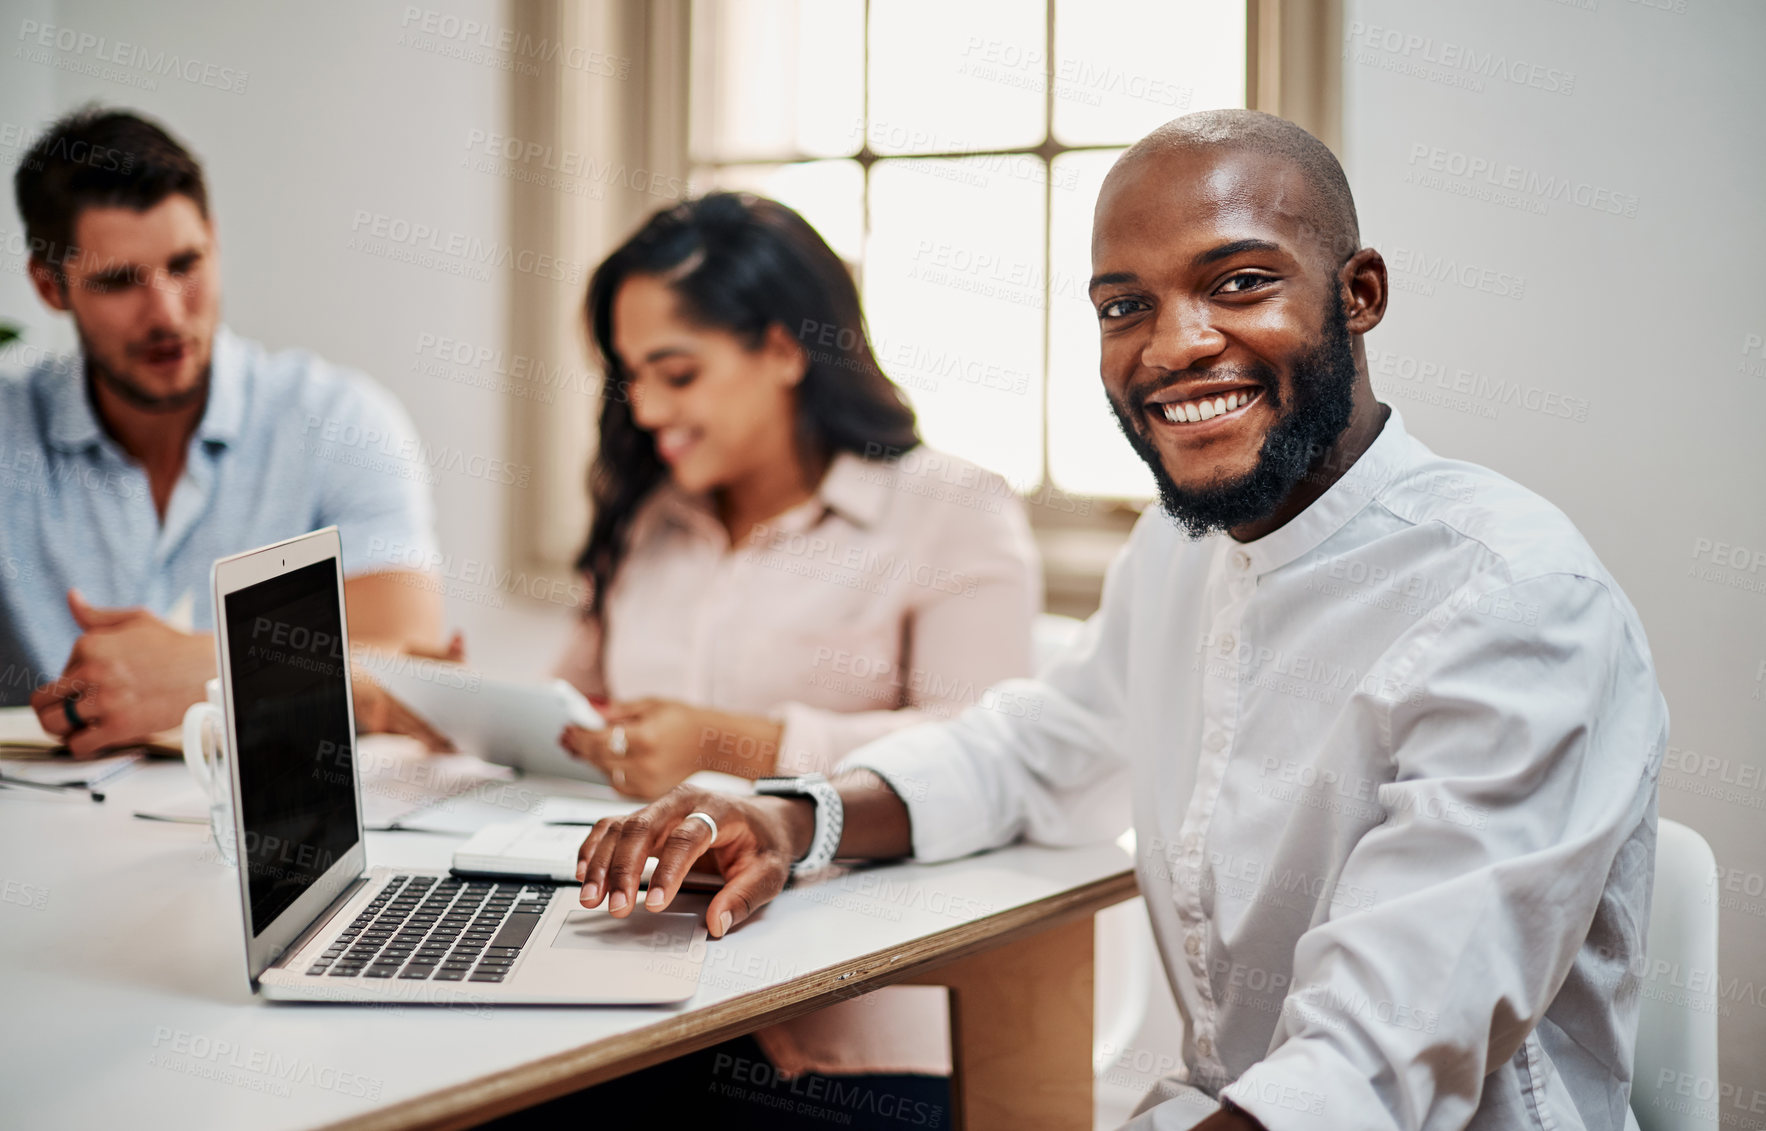 Buy stock photo Portrait of a young businessman having a meeting with colleagues in a modern office